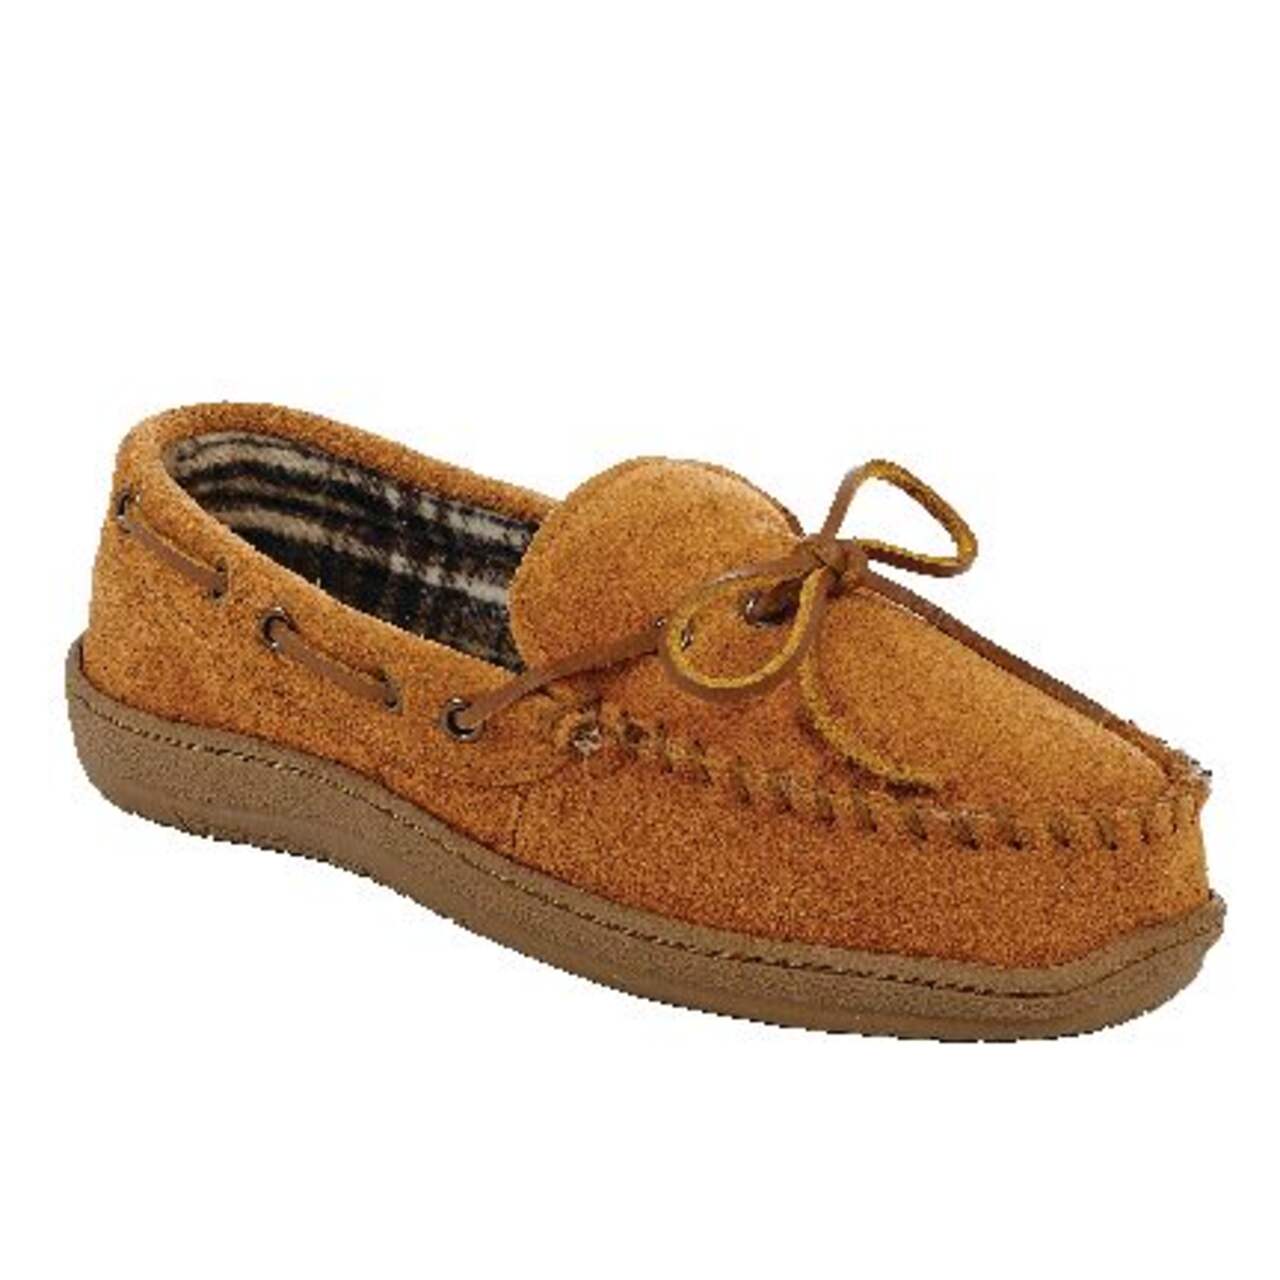 https://media-www.canadiantire.ca/product/playing/footwear-apparel/winter-footwear-apparel/1871104/outbound-moc-tan-m8-5ed8ca37-ce69-42a8-861b-073bfcd30fc0-jpgrendition.jpg?imdensity=1&imwidth=640&impolicy=mZoom